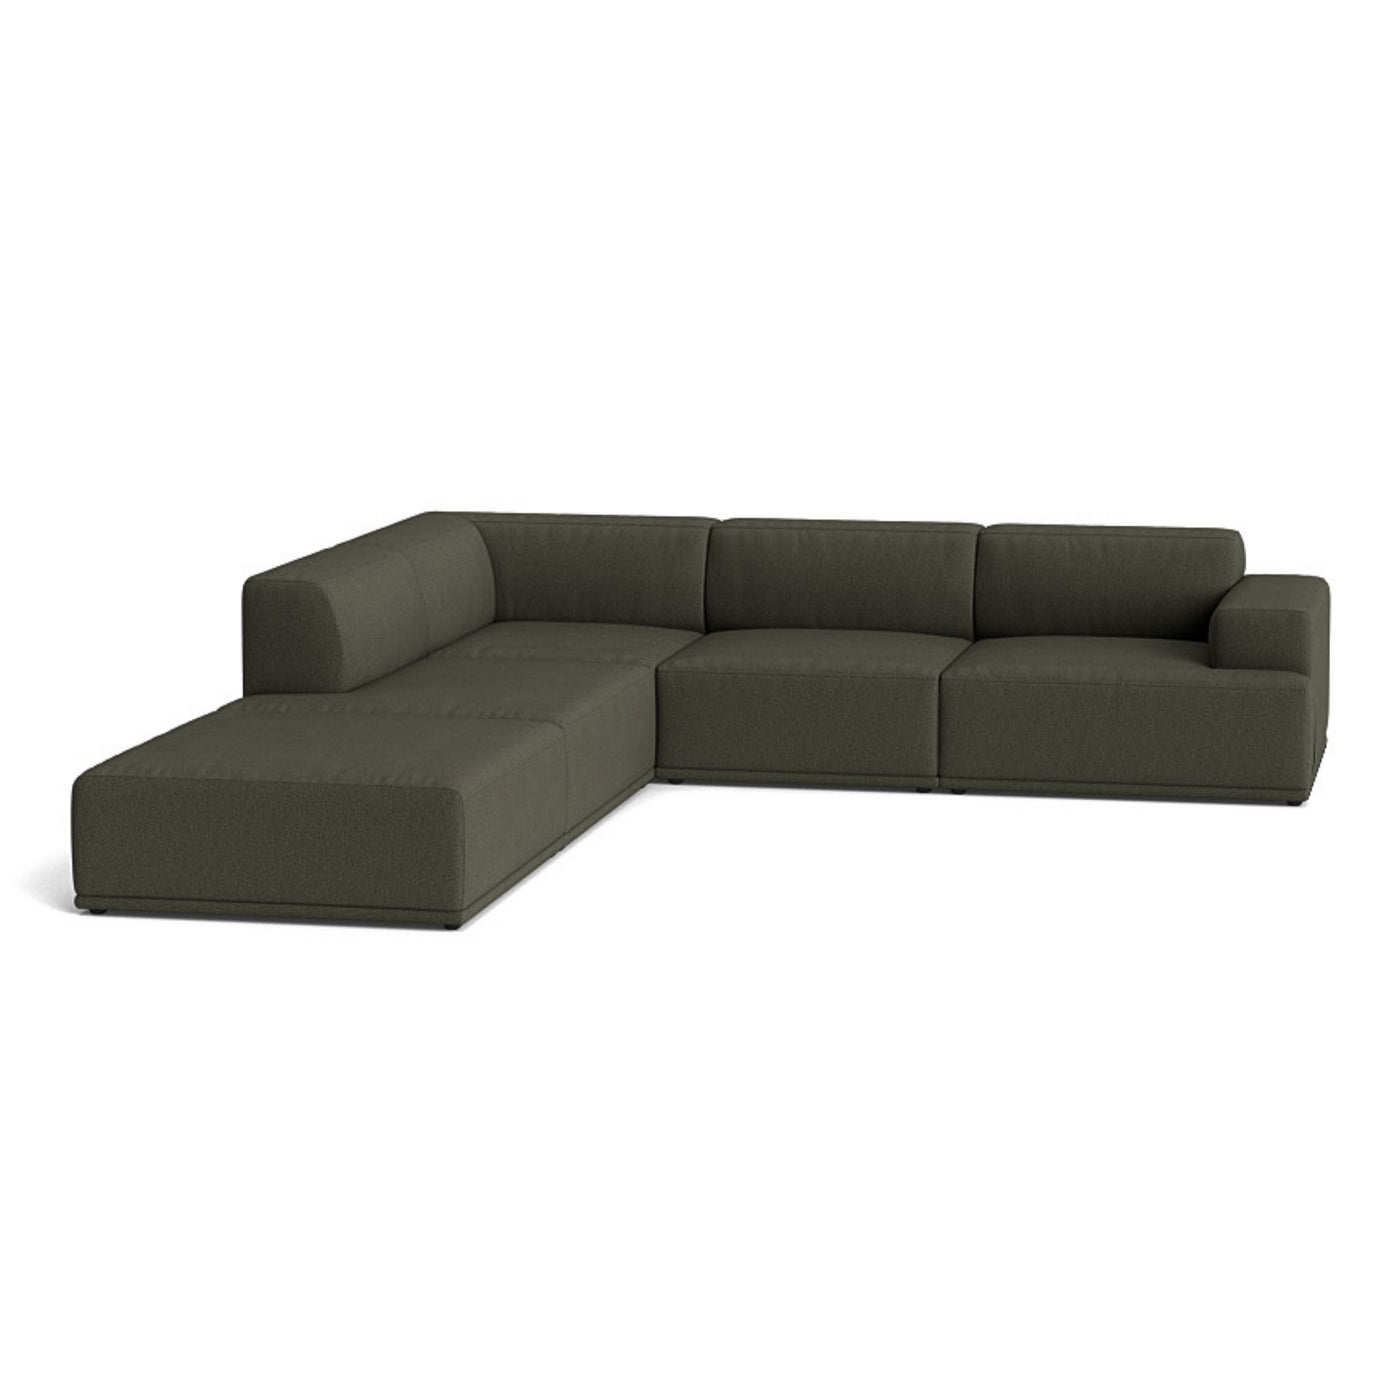 Muuto Connect Soft Modular Corner Sofa, configuration 1. Made-to-order from someday designs. #colour_clay-14